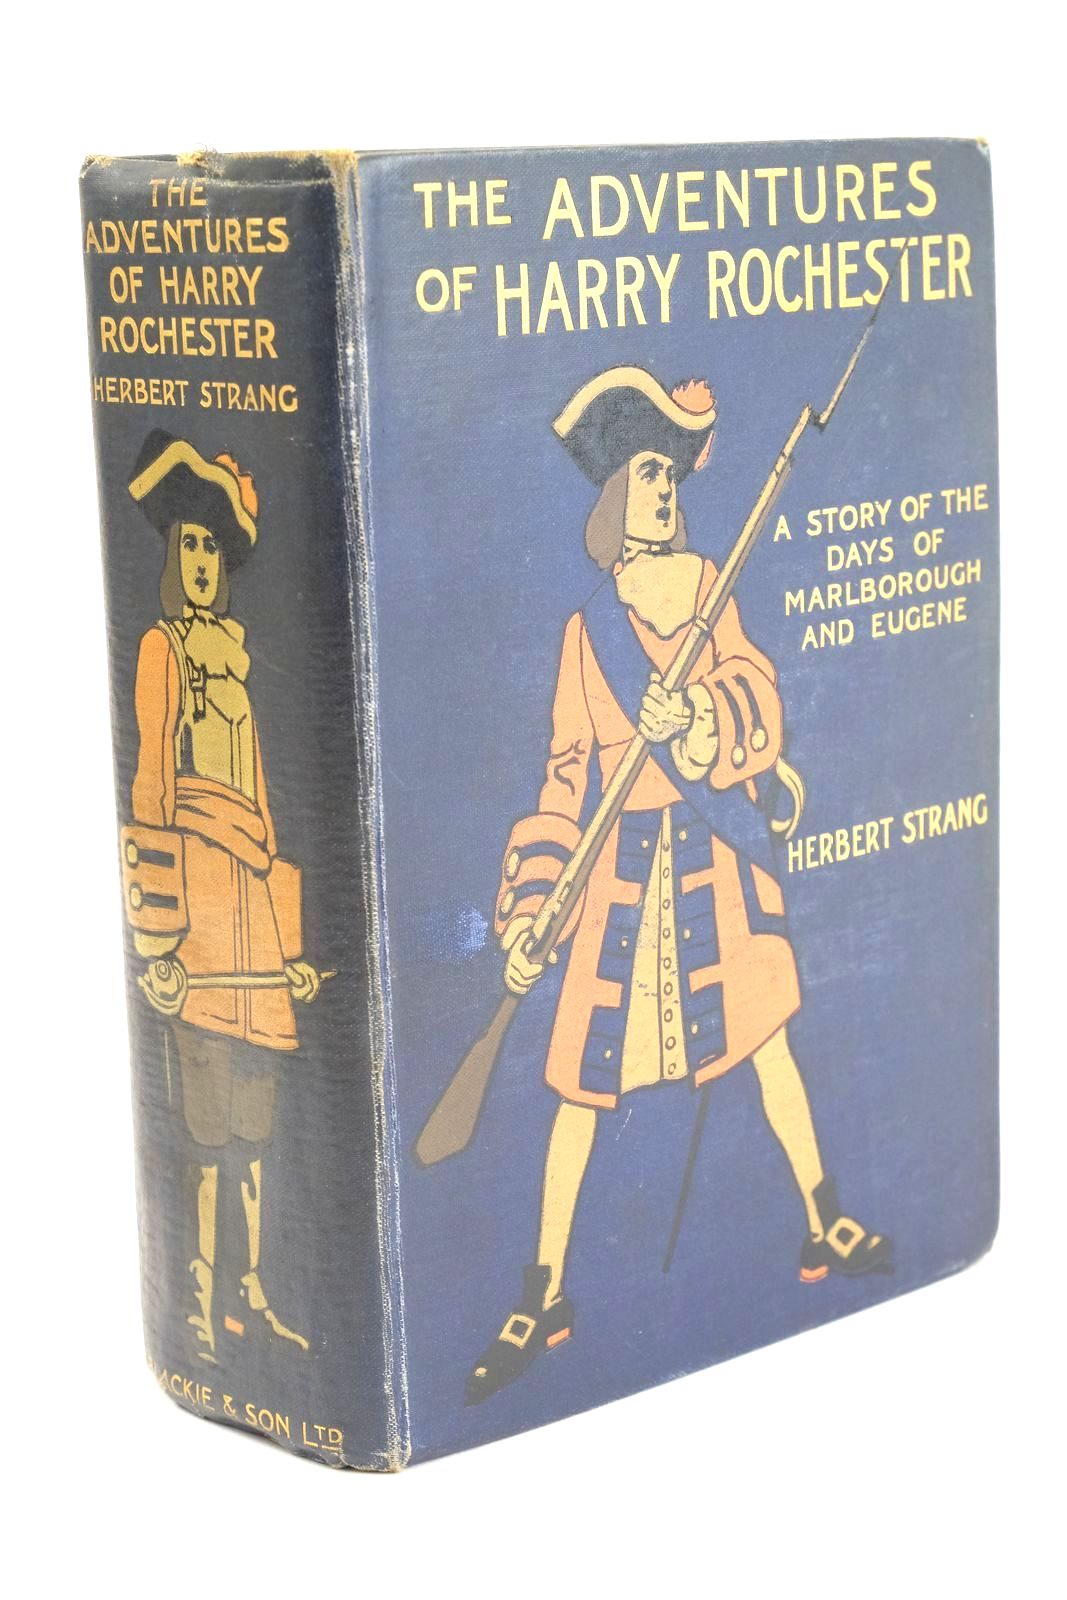 Photo of THE ADVENTURES OF HARRY ROCHESTER written by Strang, Herbert illustrated by Rainey, William published by Blackie & Son Ltd. (STOCK CODE: 1324426)  for sale by Stella & Rose's Books